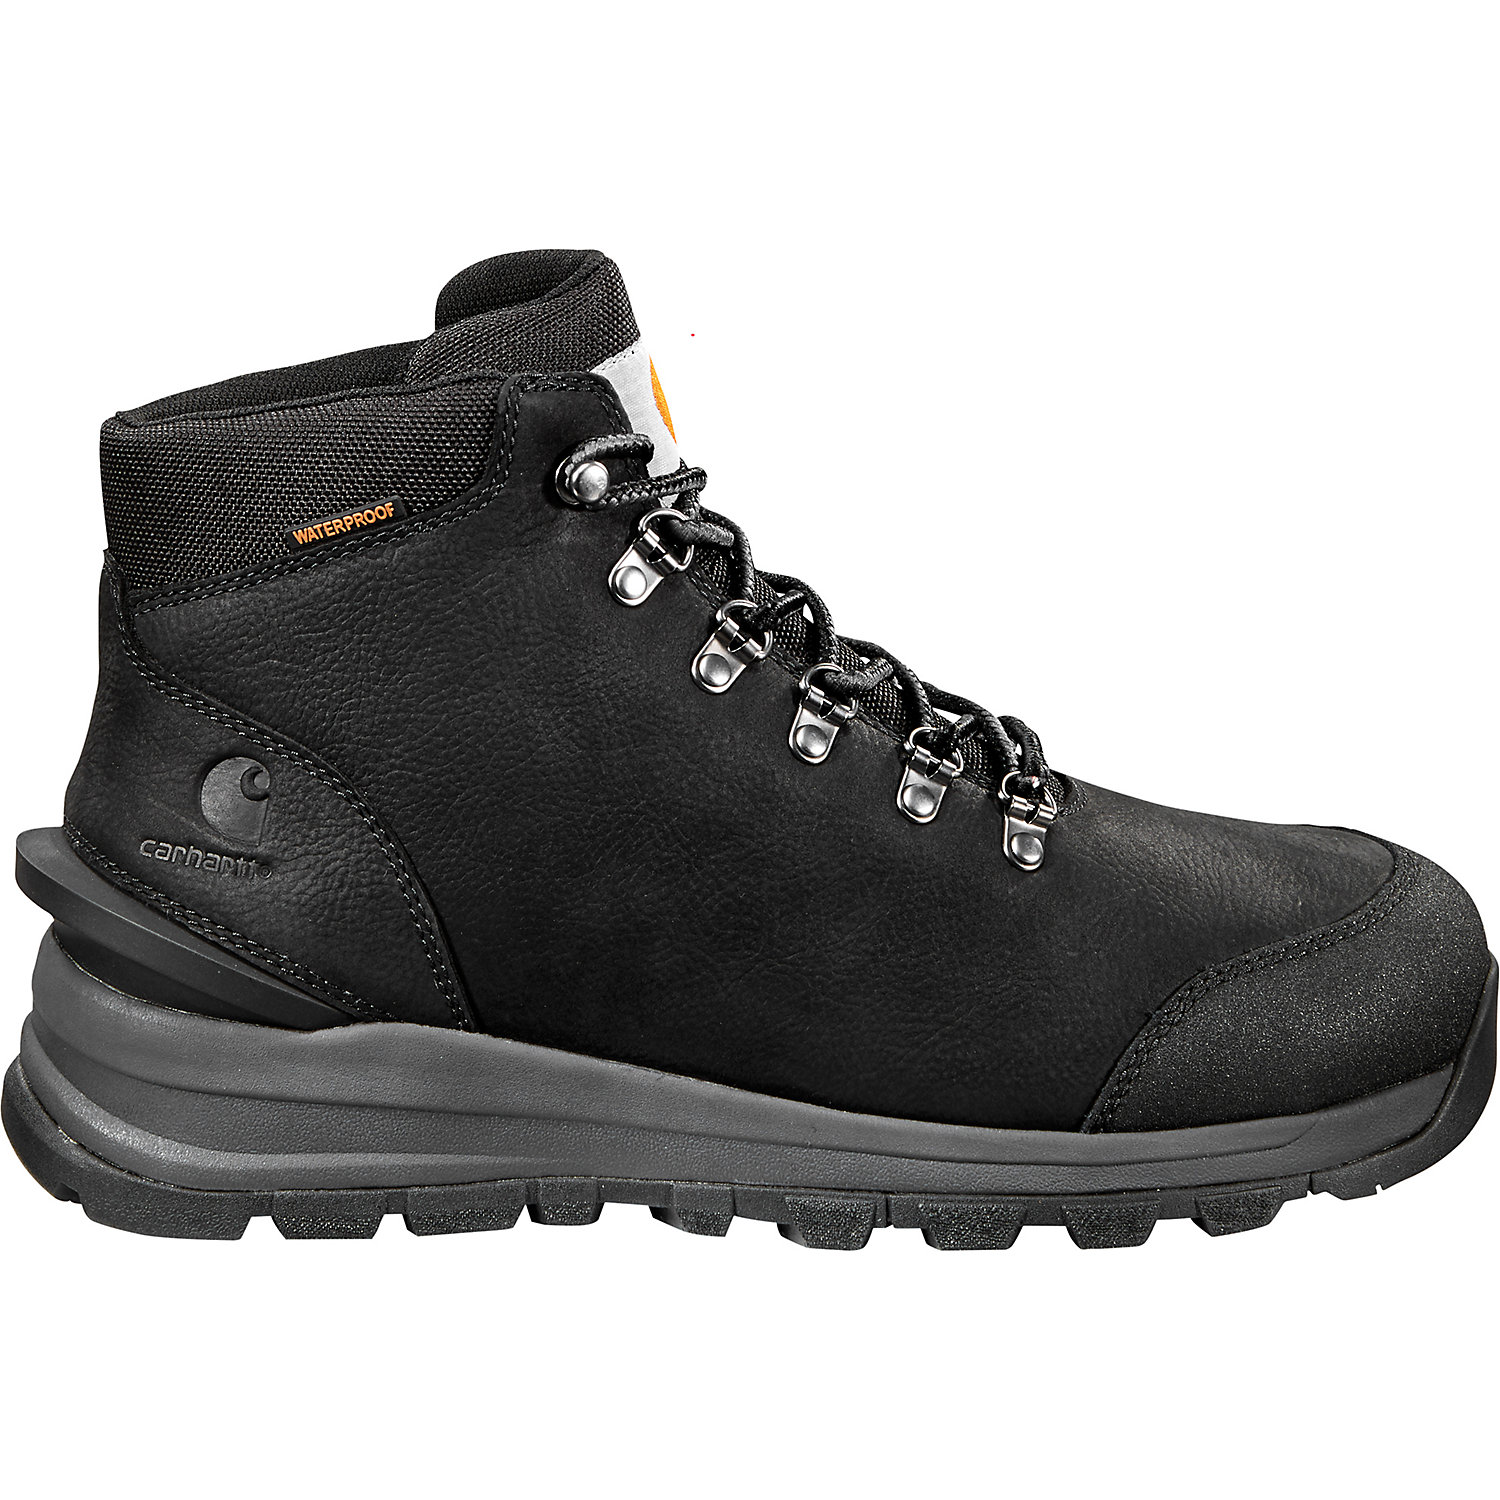 Carhartt Mens Gilmore Waterproof 5 Inch Hiker - Non-Safety Toe